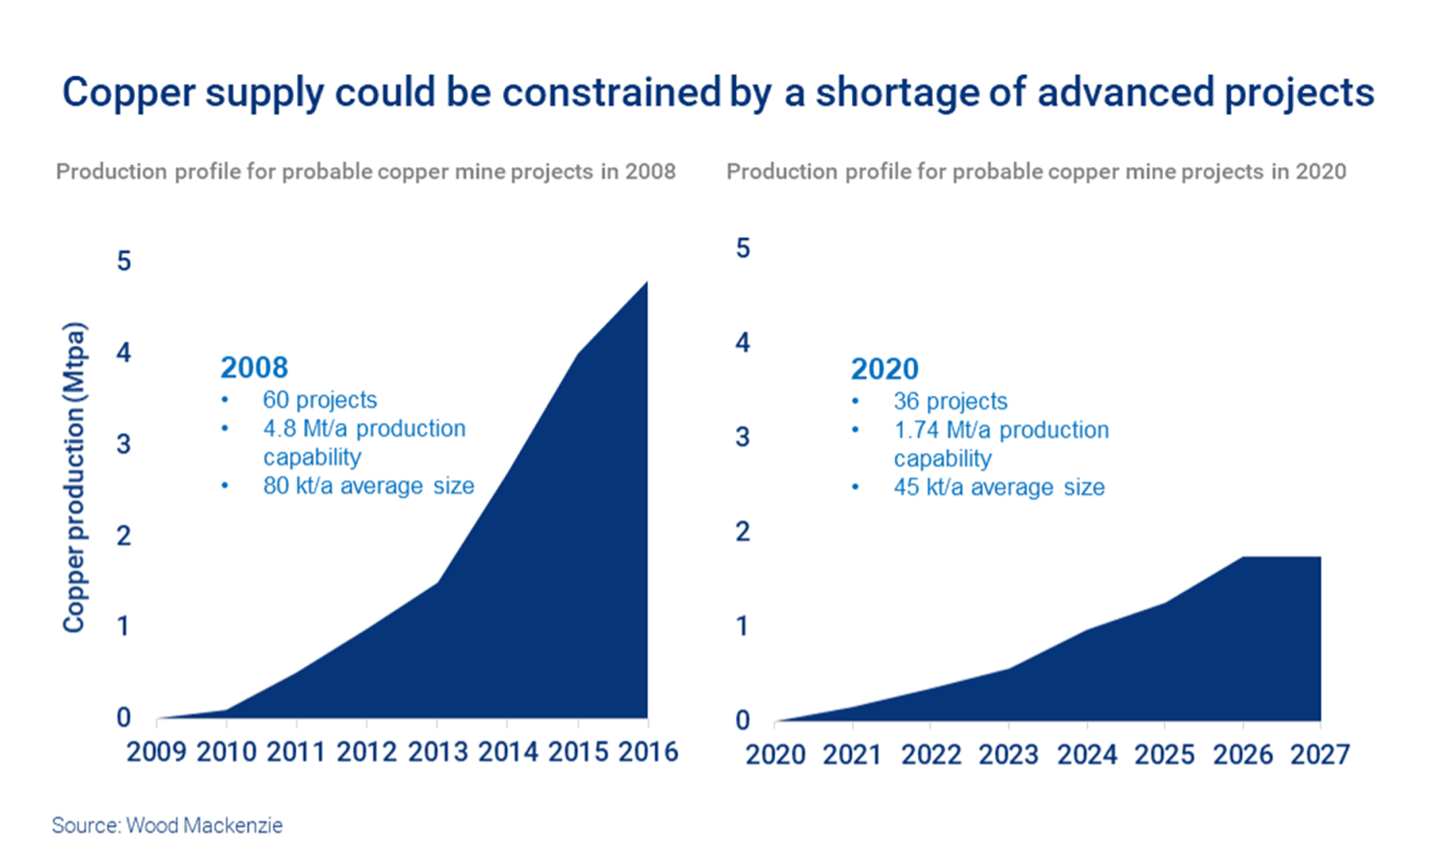 Production profile for probable copper mine projects - 2008 vs 2020